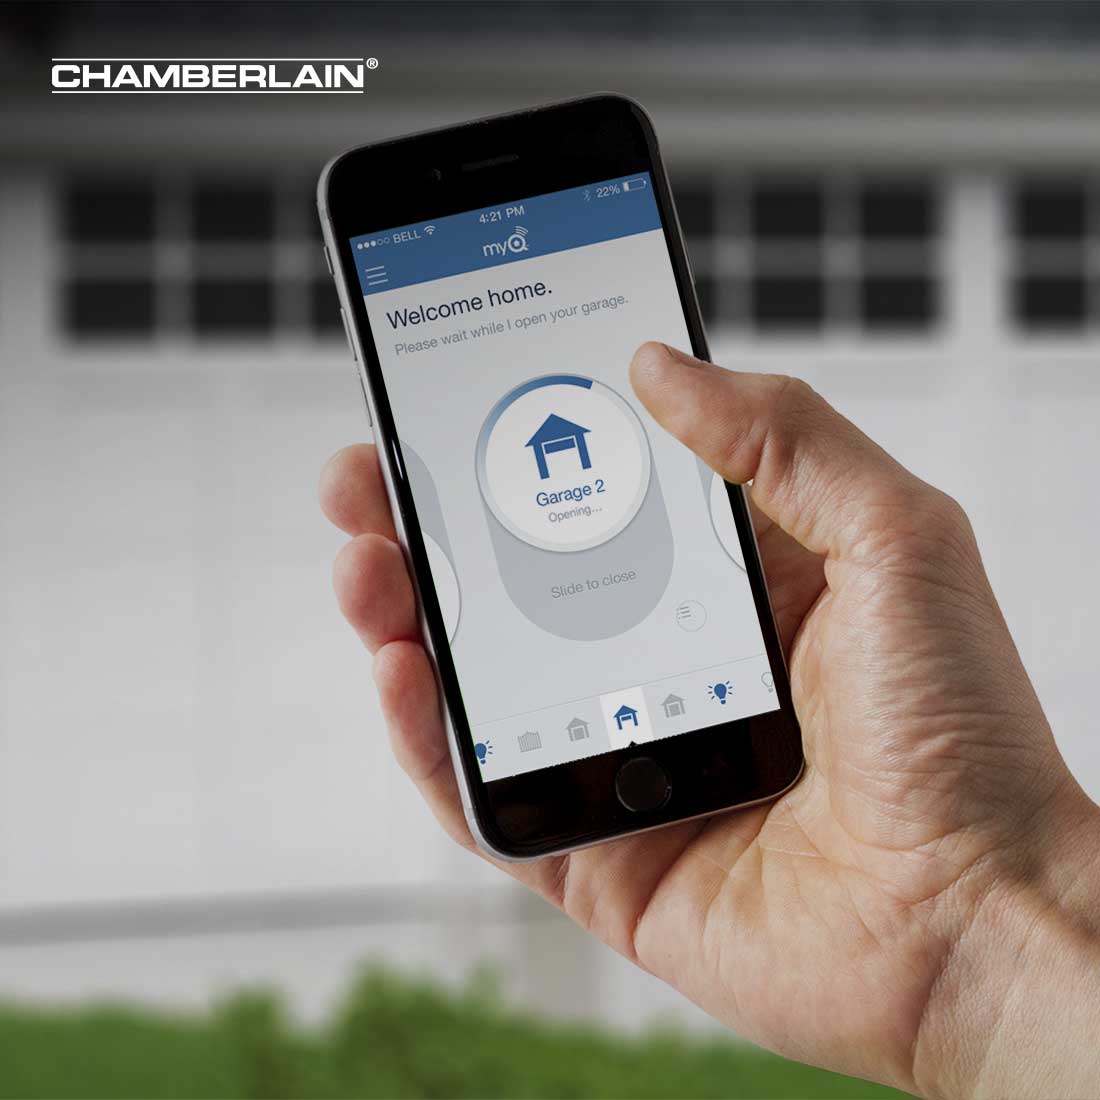 Hand holding a smart home garage app with the company logo "Chamberlain" in the top left corner.